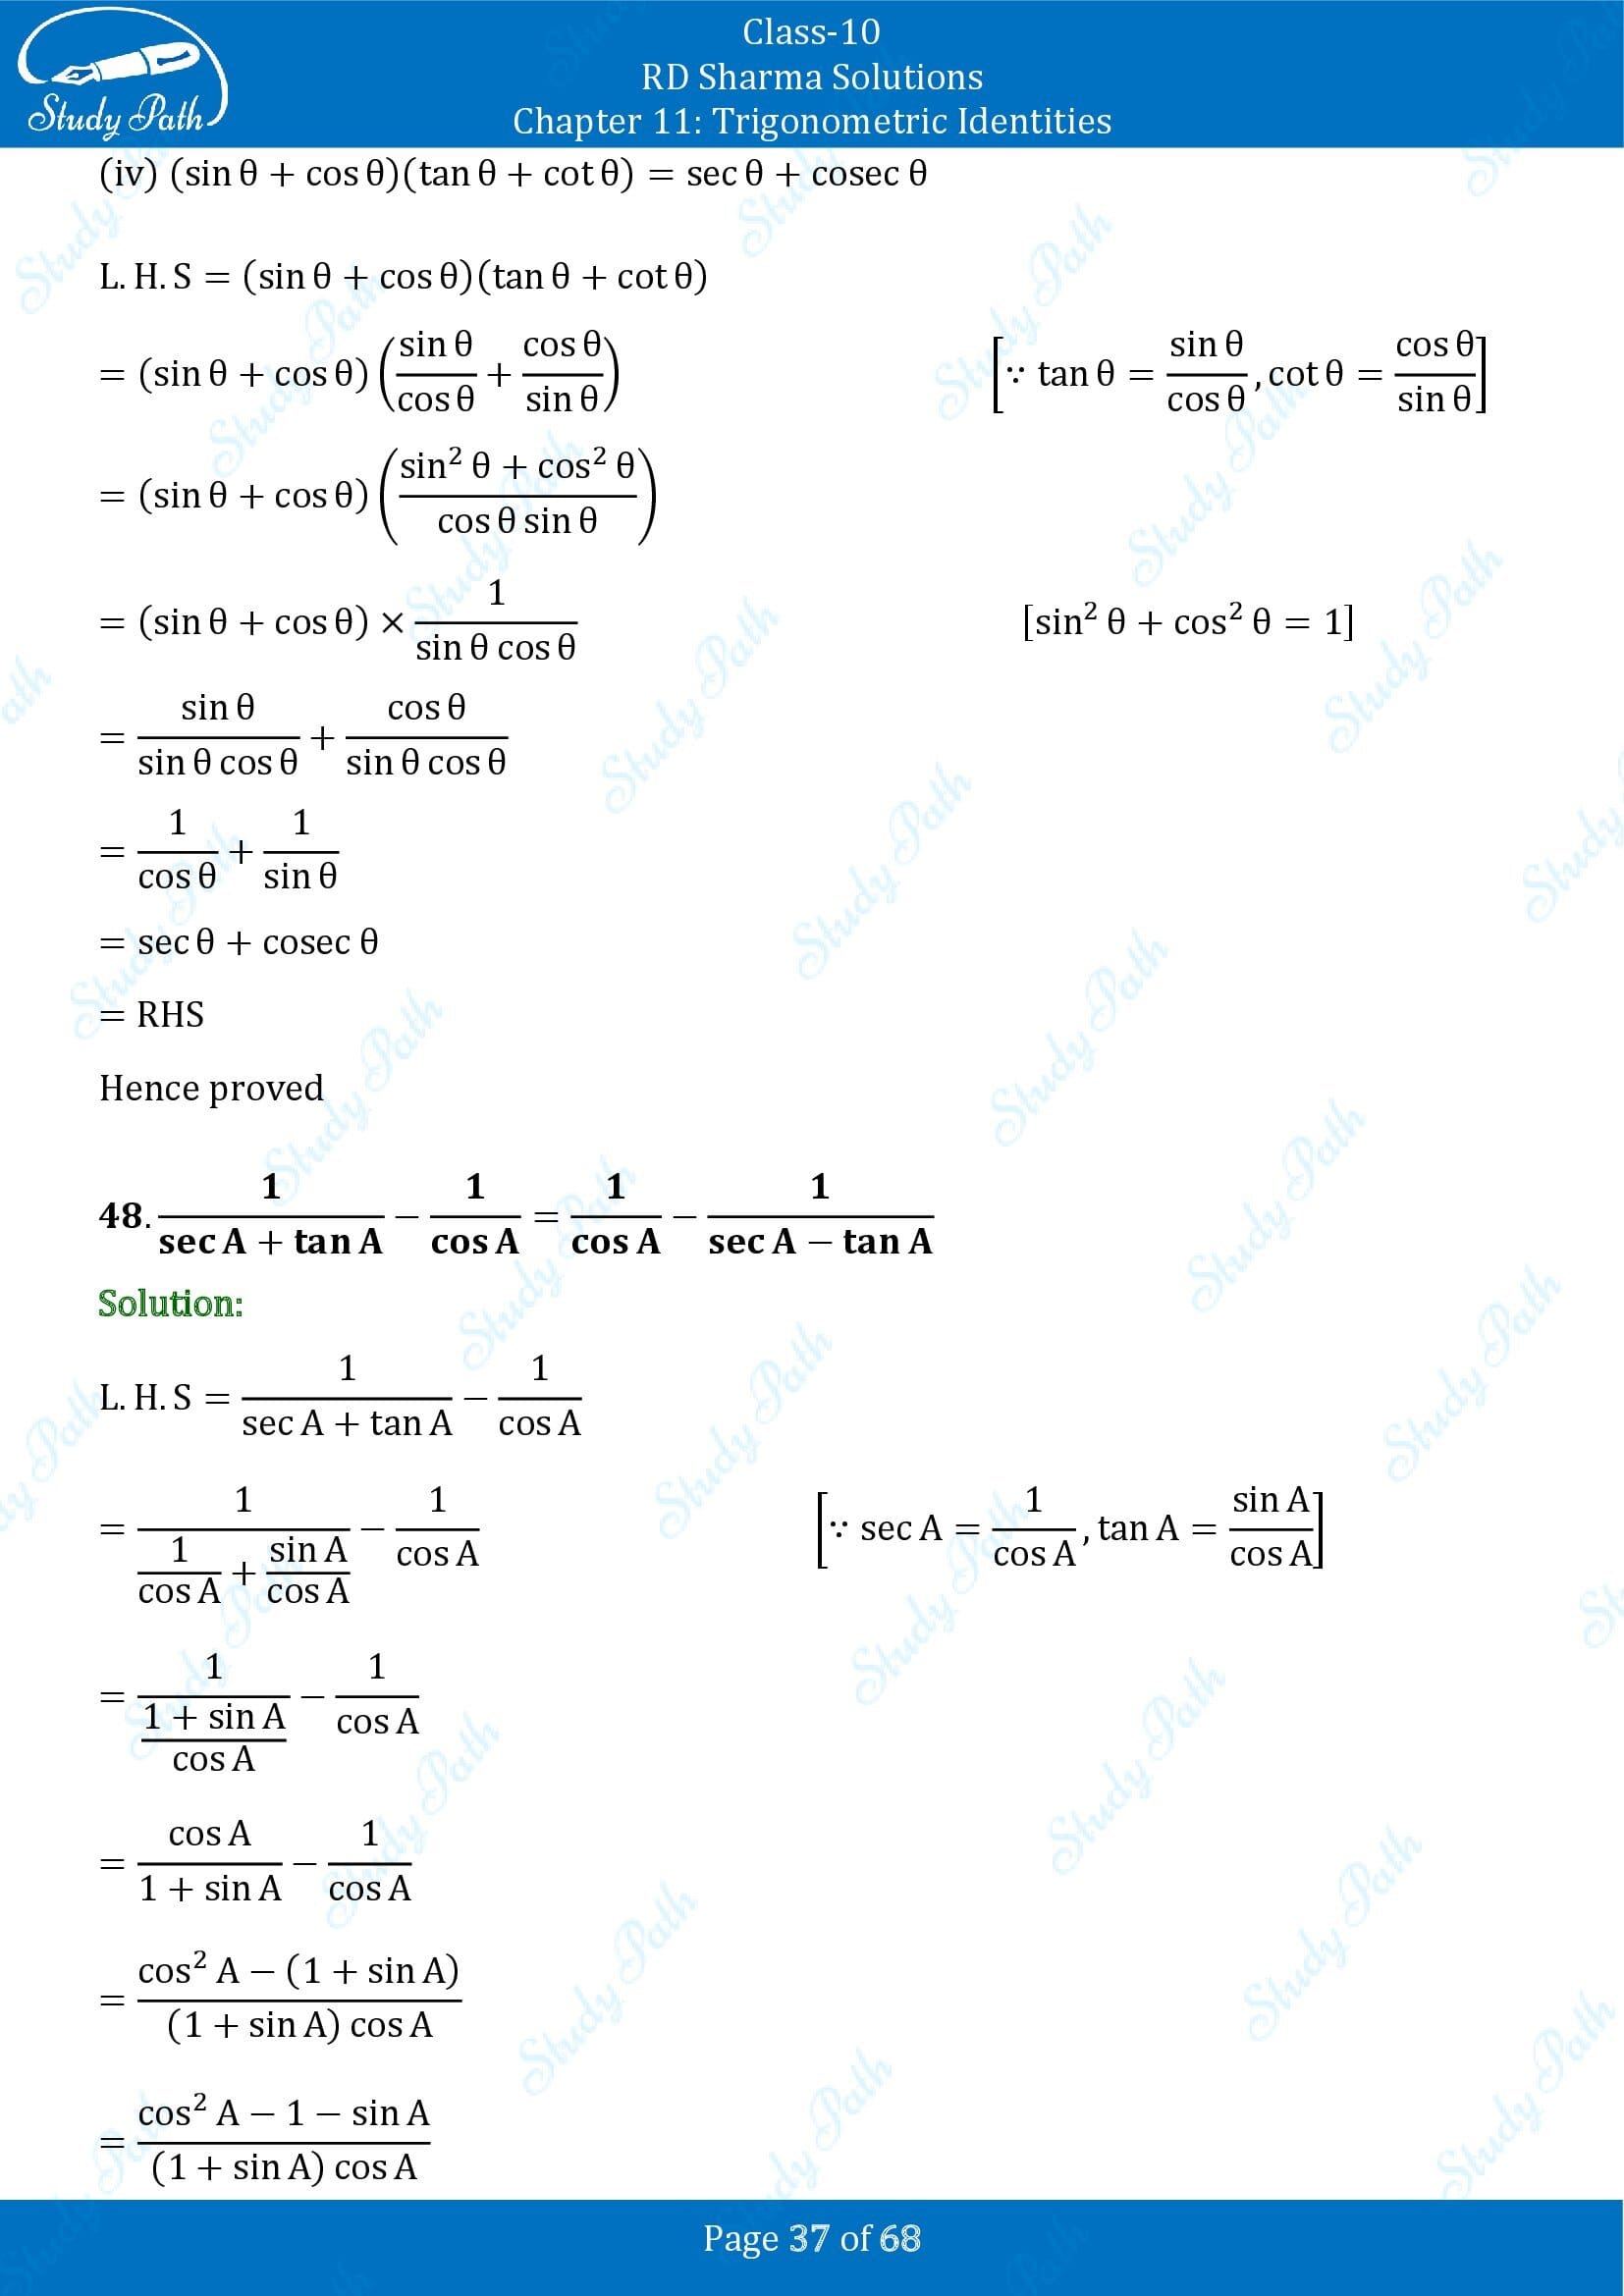 RD Sharma Solutions Class 10 Chapter 11 Trigonometric Identities Exercise 11.1 00037